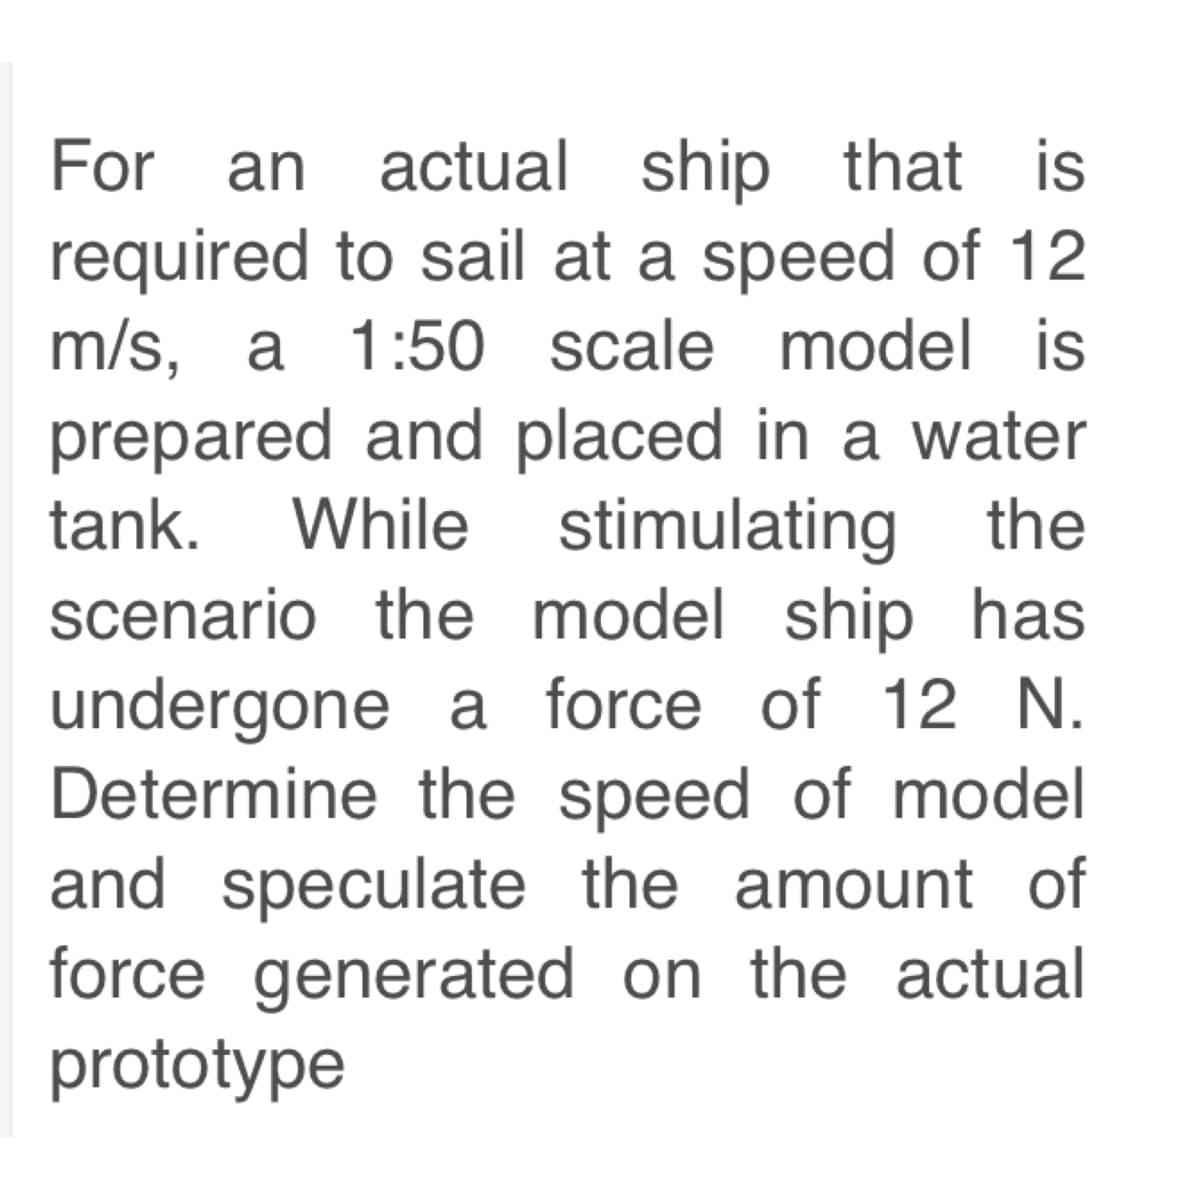 For an actual ship that is
required to sail at a speed of 12
m/s, a 1:50 scale model is
prepared and placed in a water
tank. While stimulating the
scenario the model ship has
undergone a force of 12 N.
Determine the speed of model
and speculate the amount of
force generated on the actual
prototype